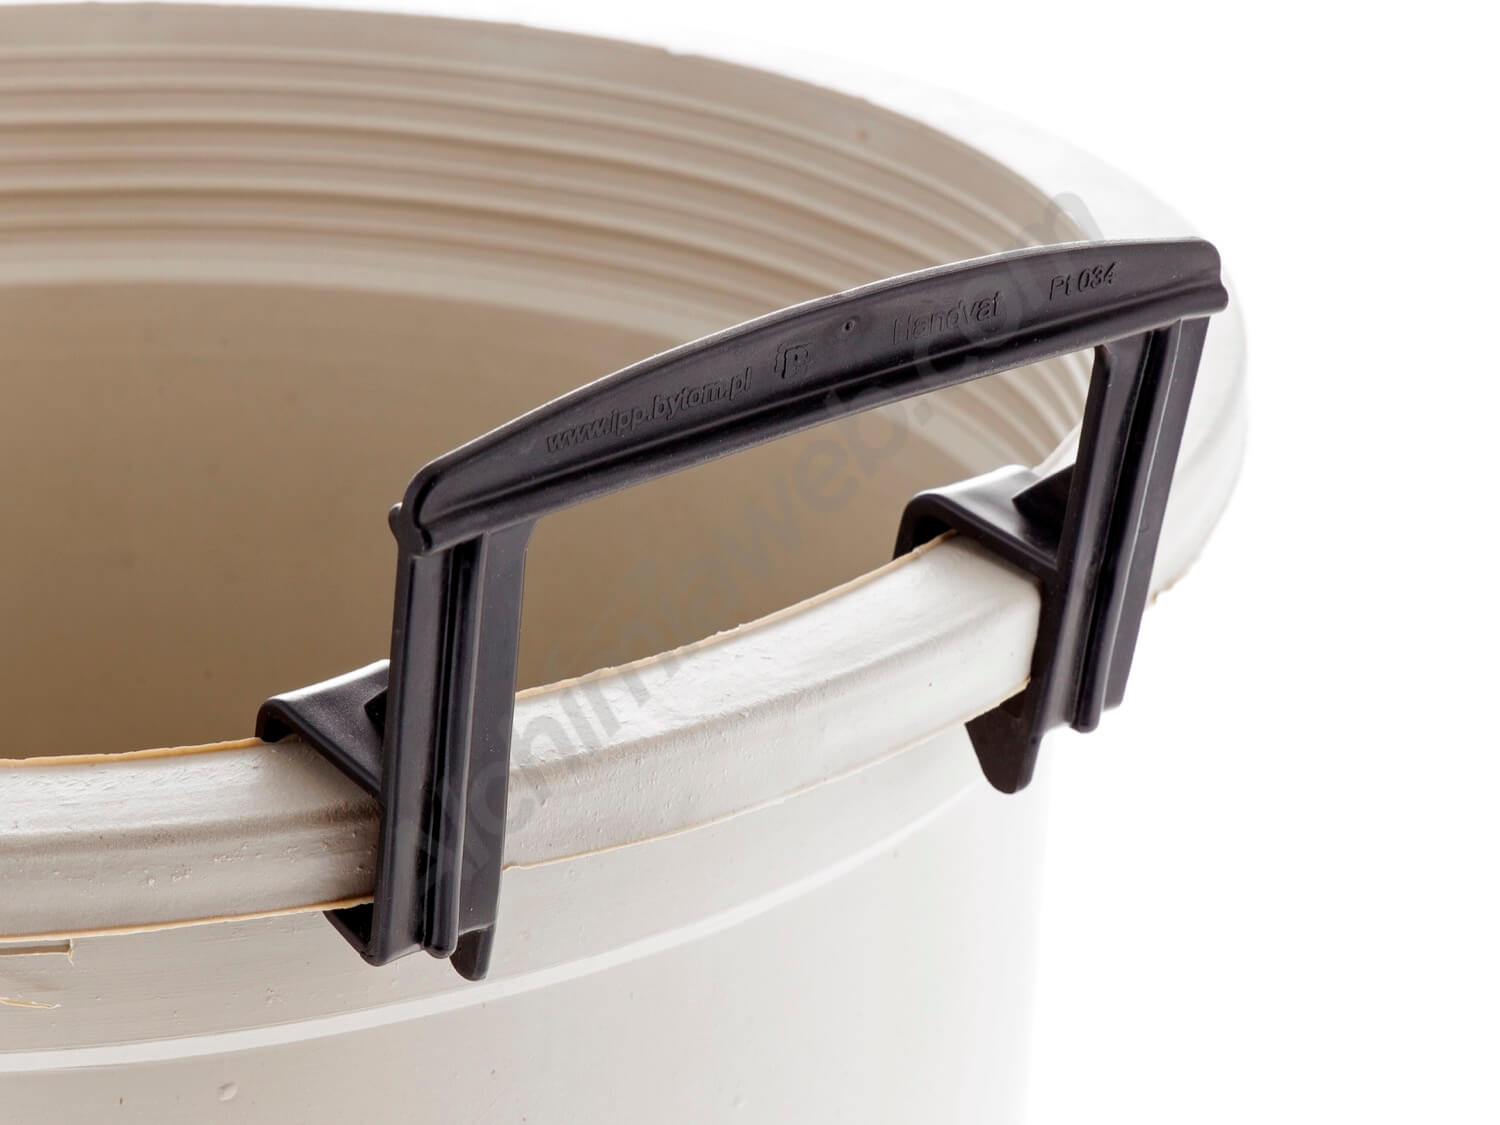 Handles for containers (2 units)